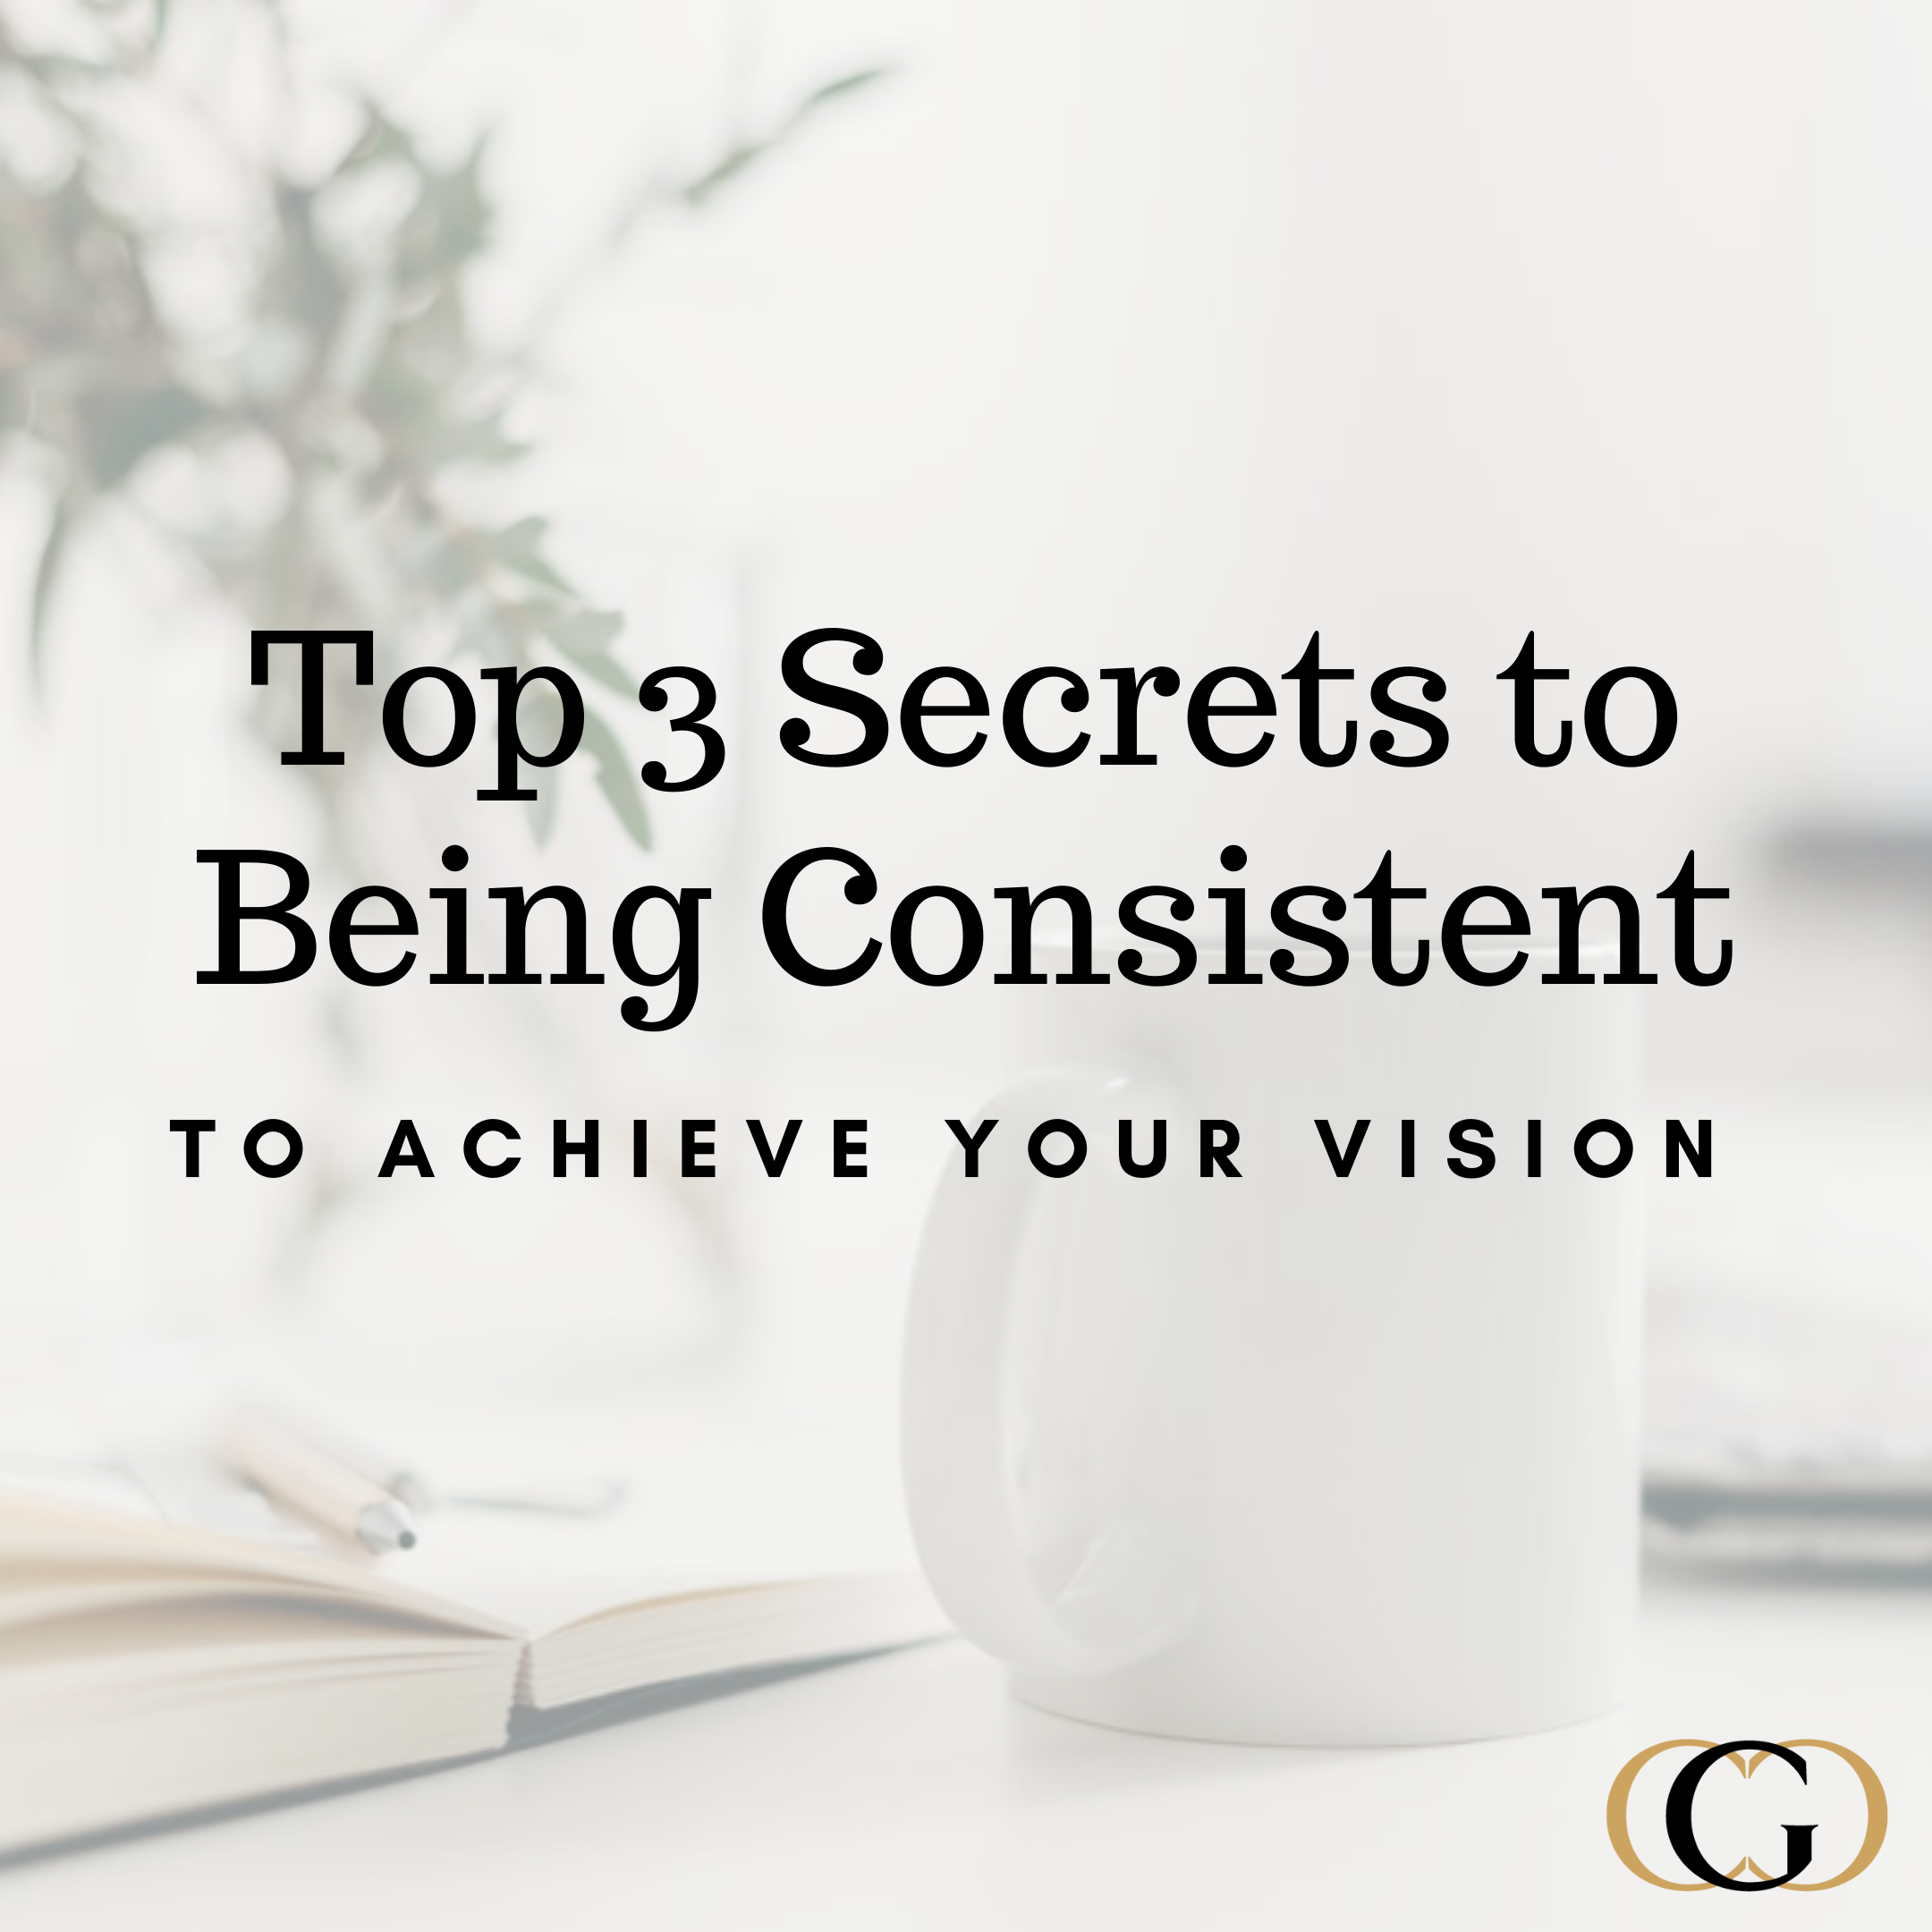 Top 3 Secrets to Being Consistent to Achieve Your Vision